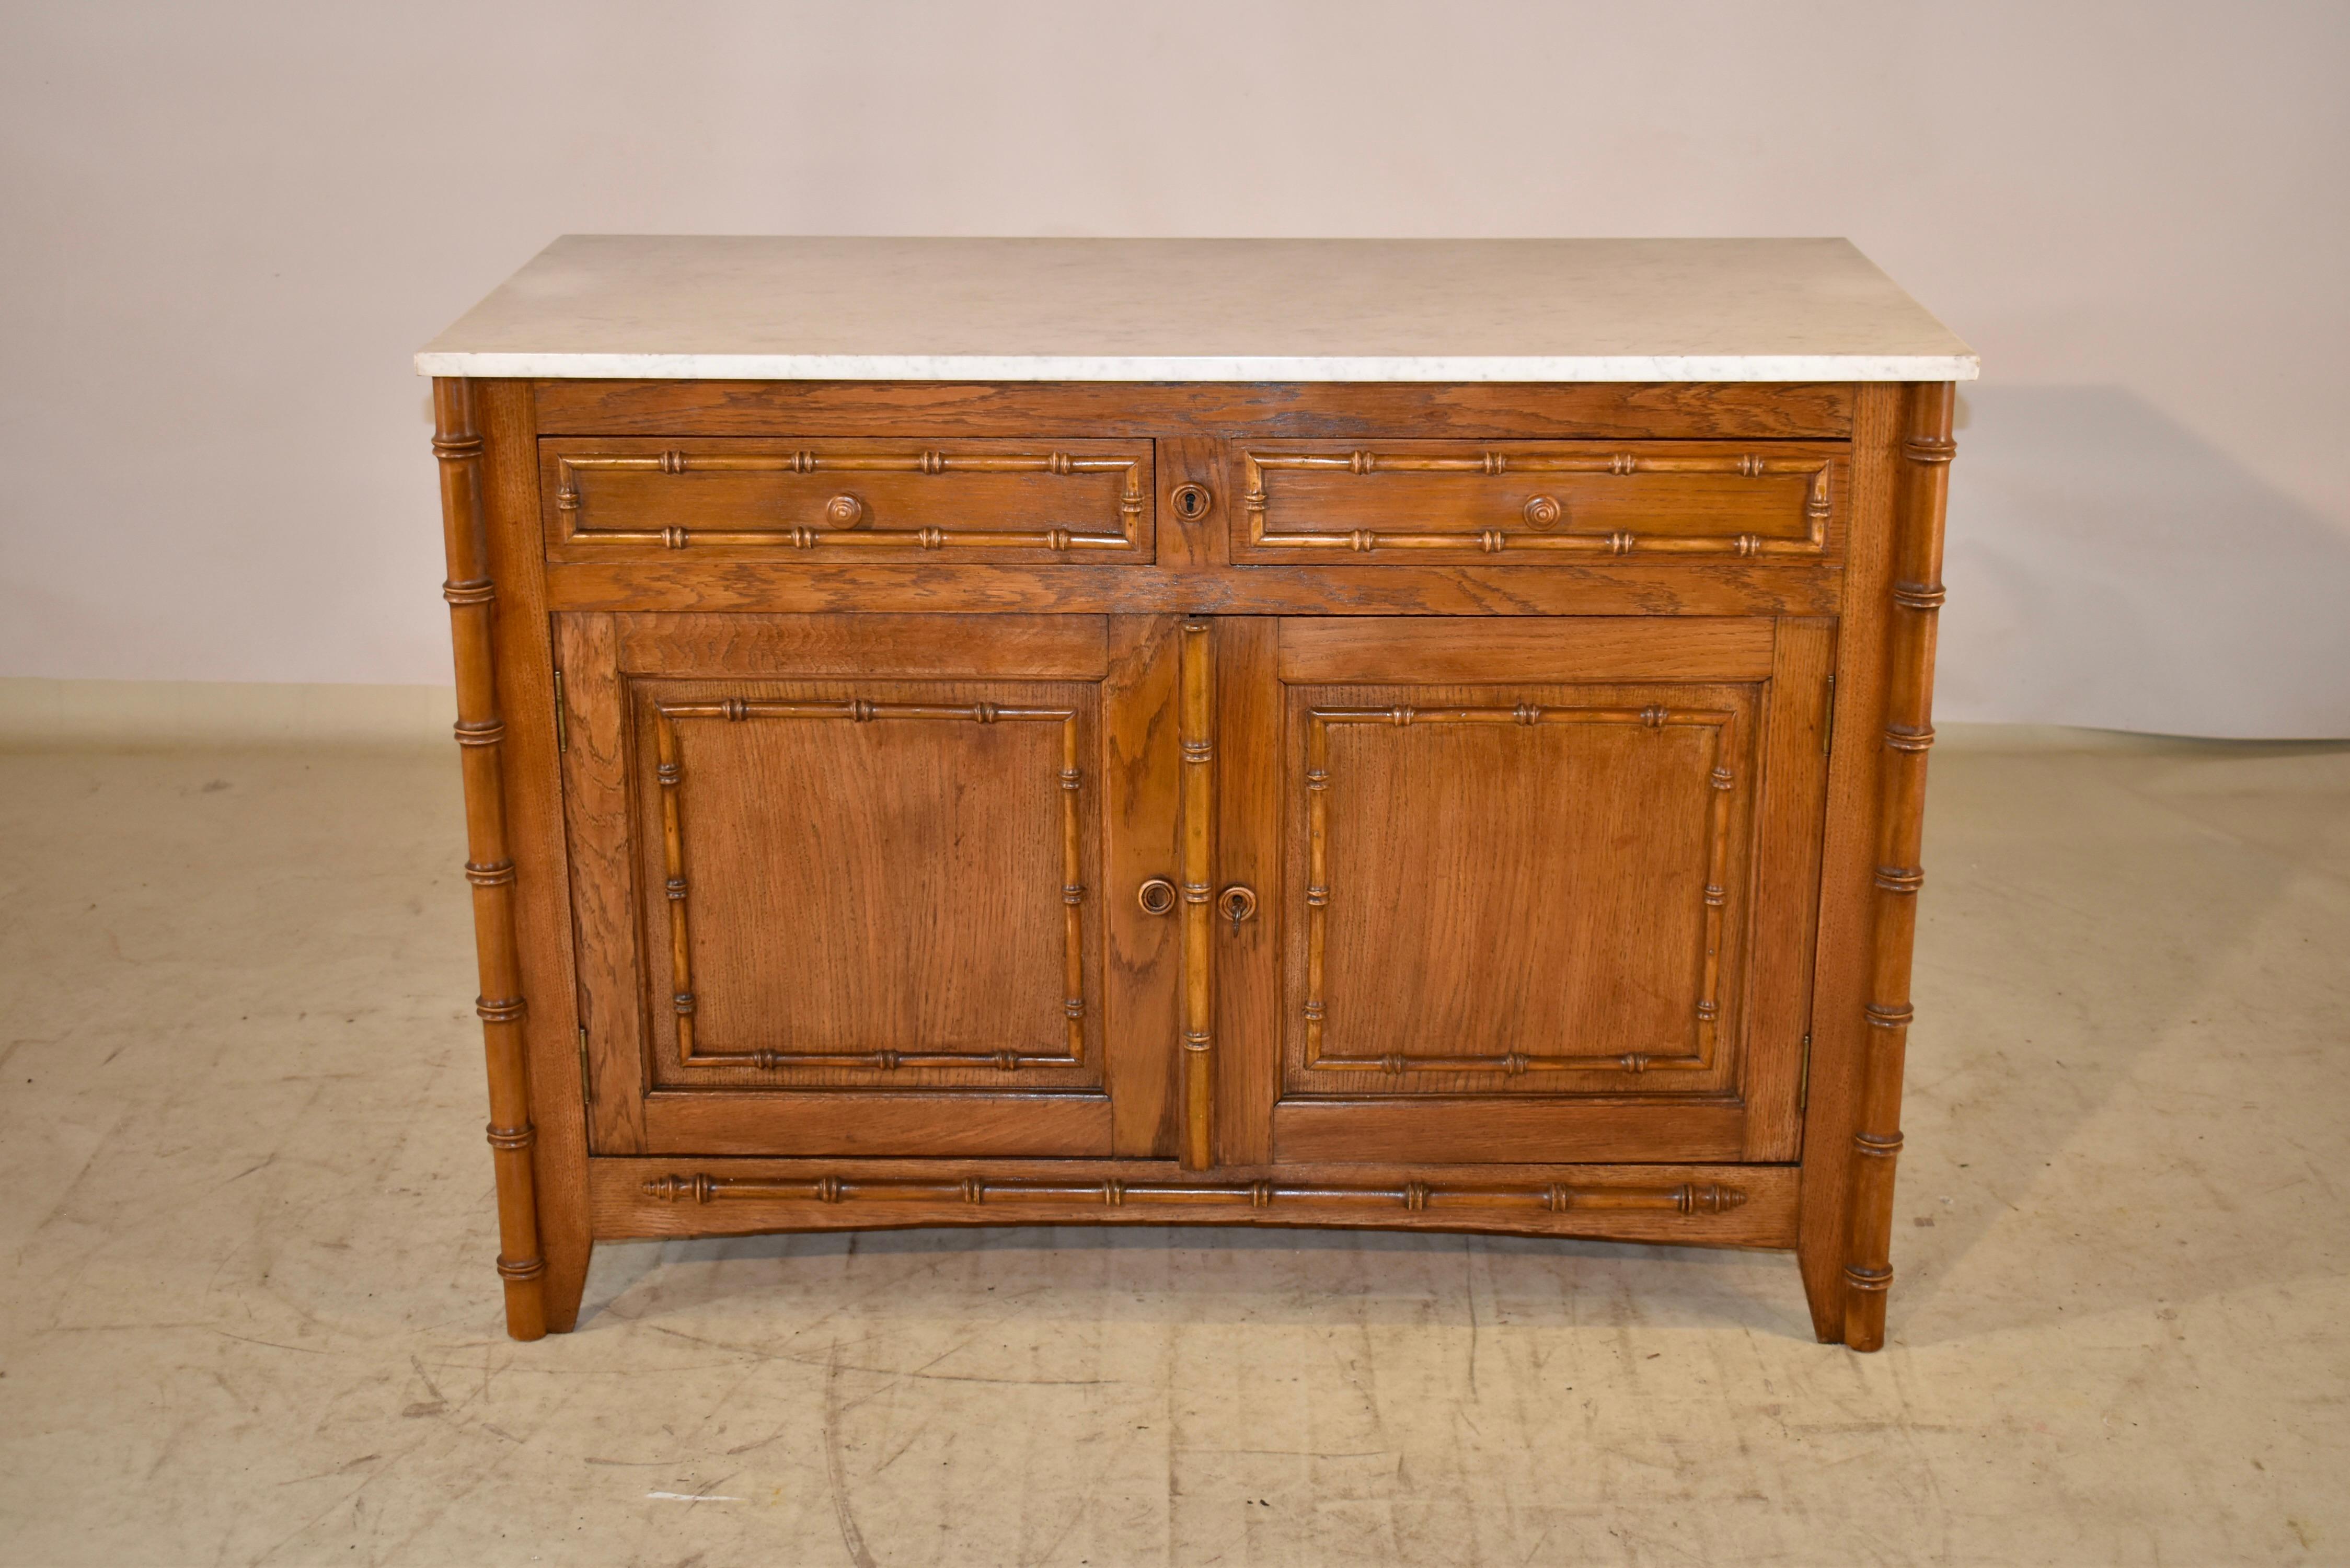 19th century faux bamboo buffet with a Carrara marble top from France.  The top has a lovely matrix and is a nice neutral color to compliment any decor.  The case has paneled sides, which is a great design feature seen from either side of the piece.